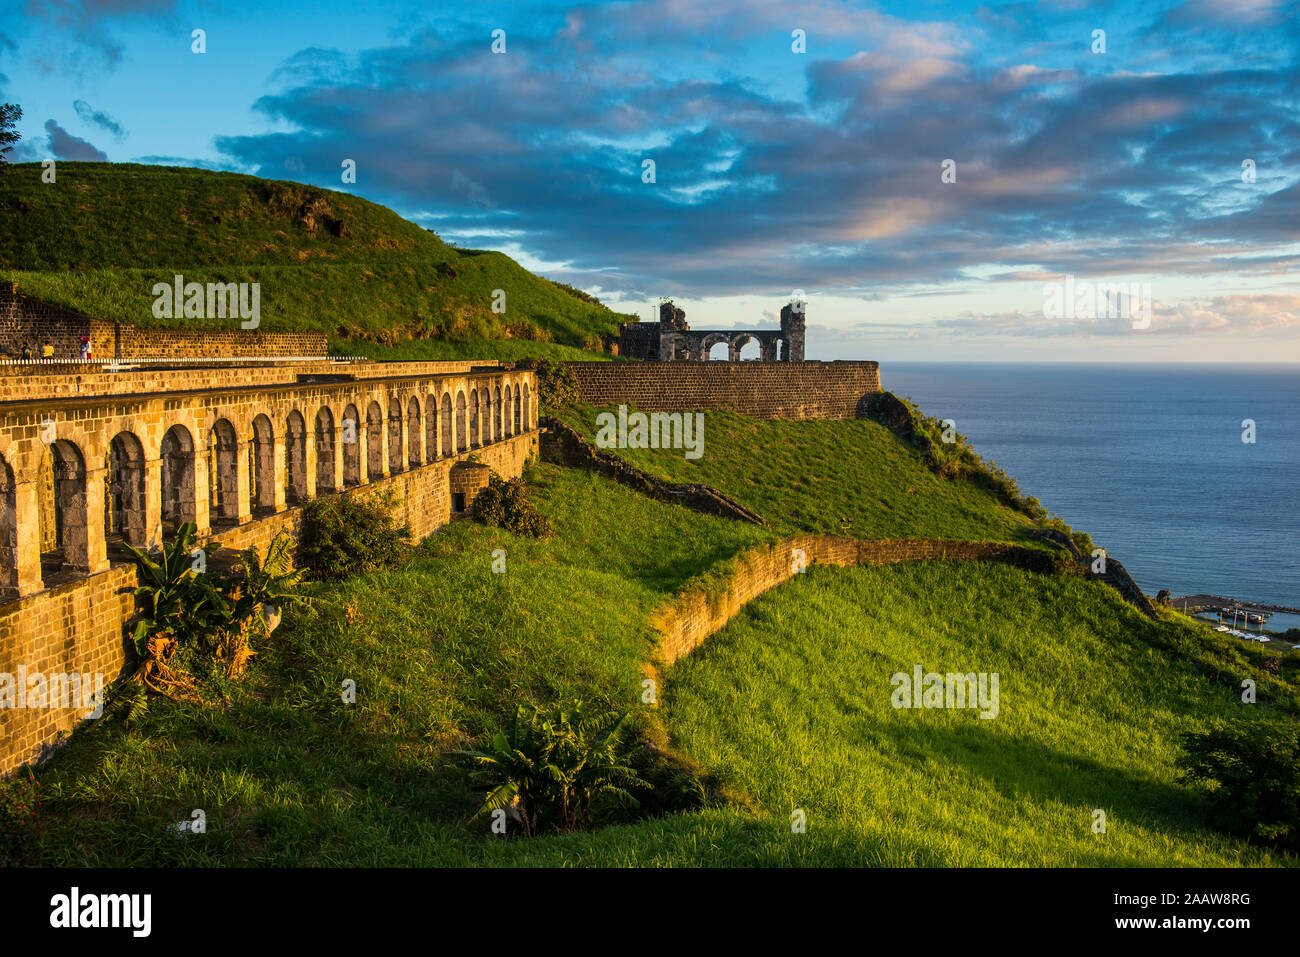 Brimstone hill fortress by sea against sky, St. Kitts and Nevis, Caribbean Stock Photo